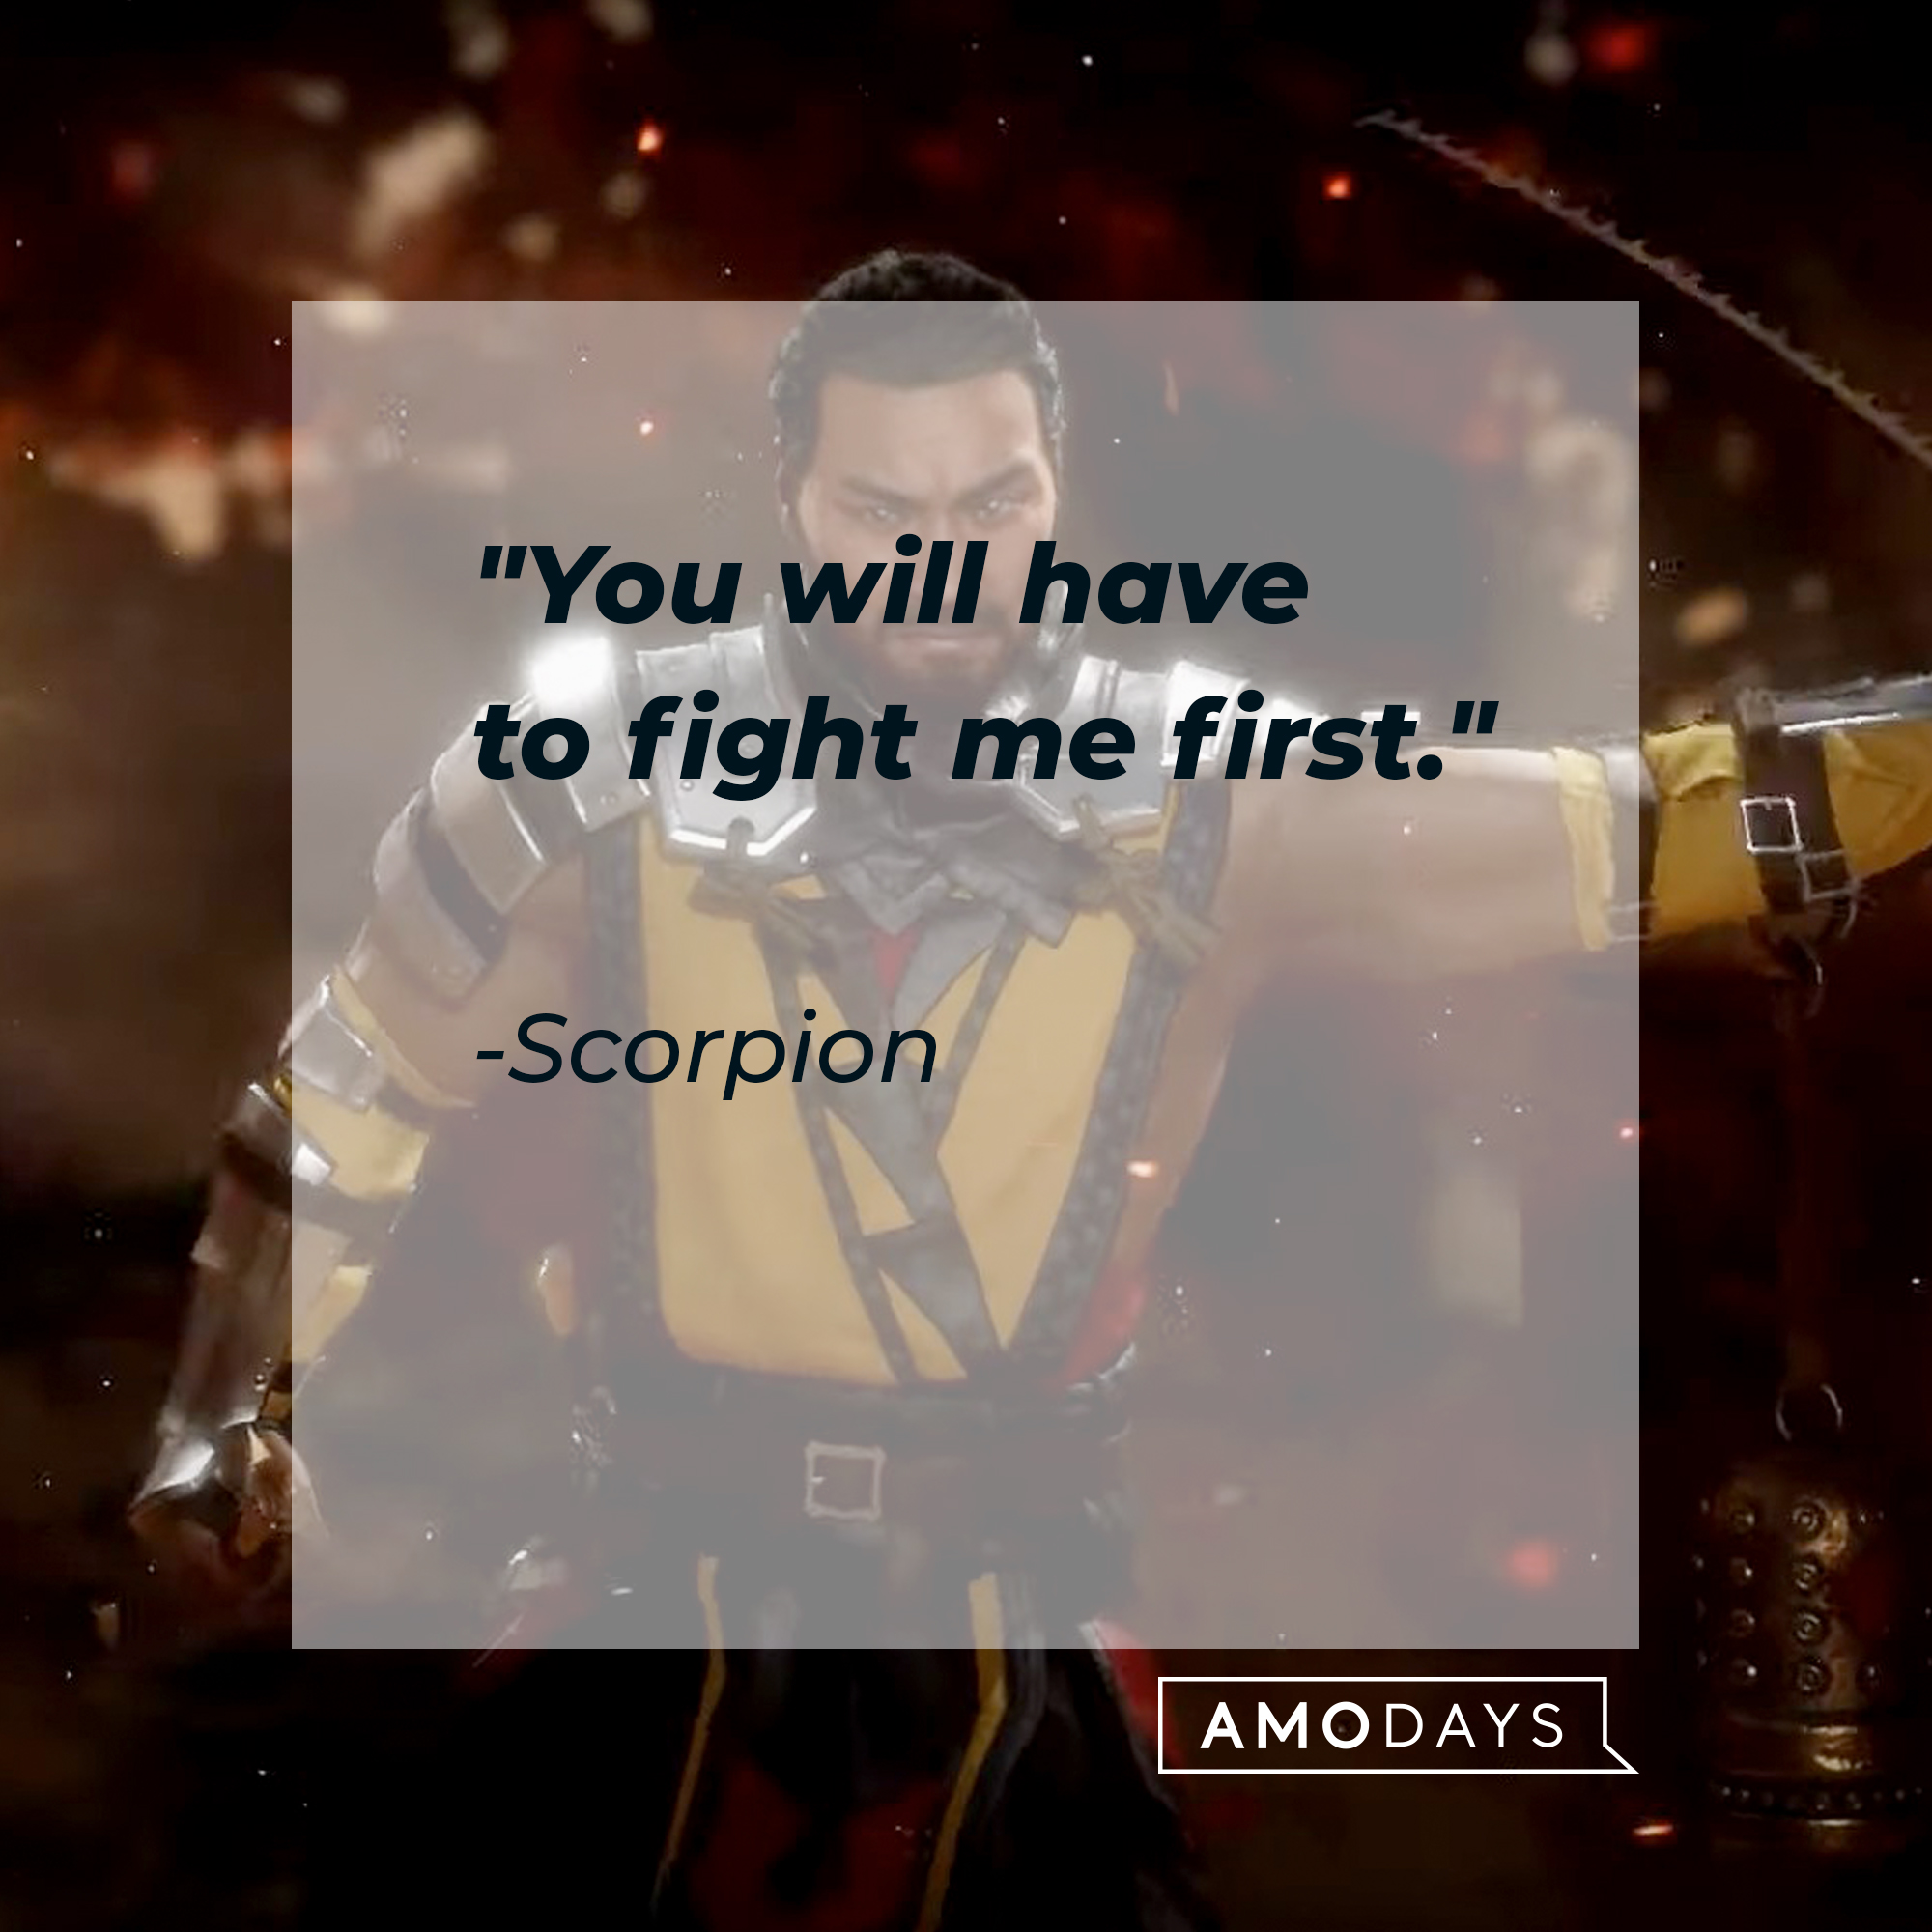 An image of Scorpion with his quote: "You will have to fight me first." | Source: facebook.com/MortalKombatUK